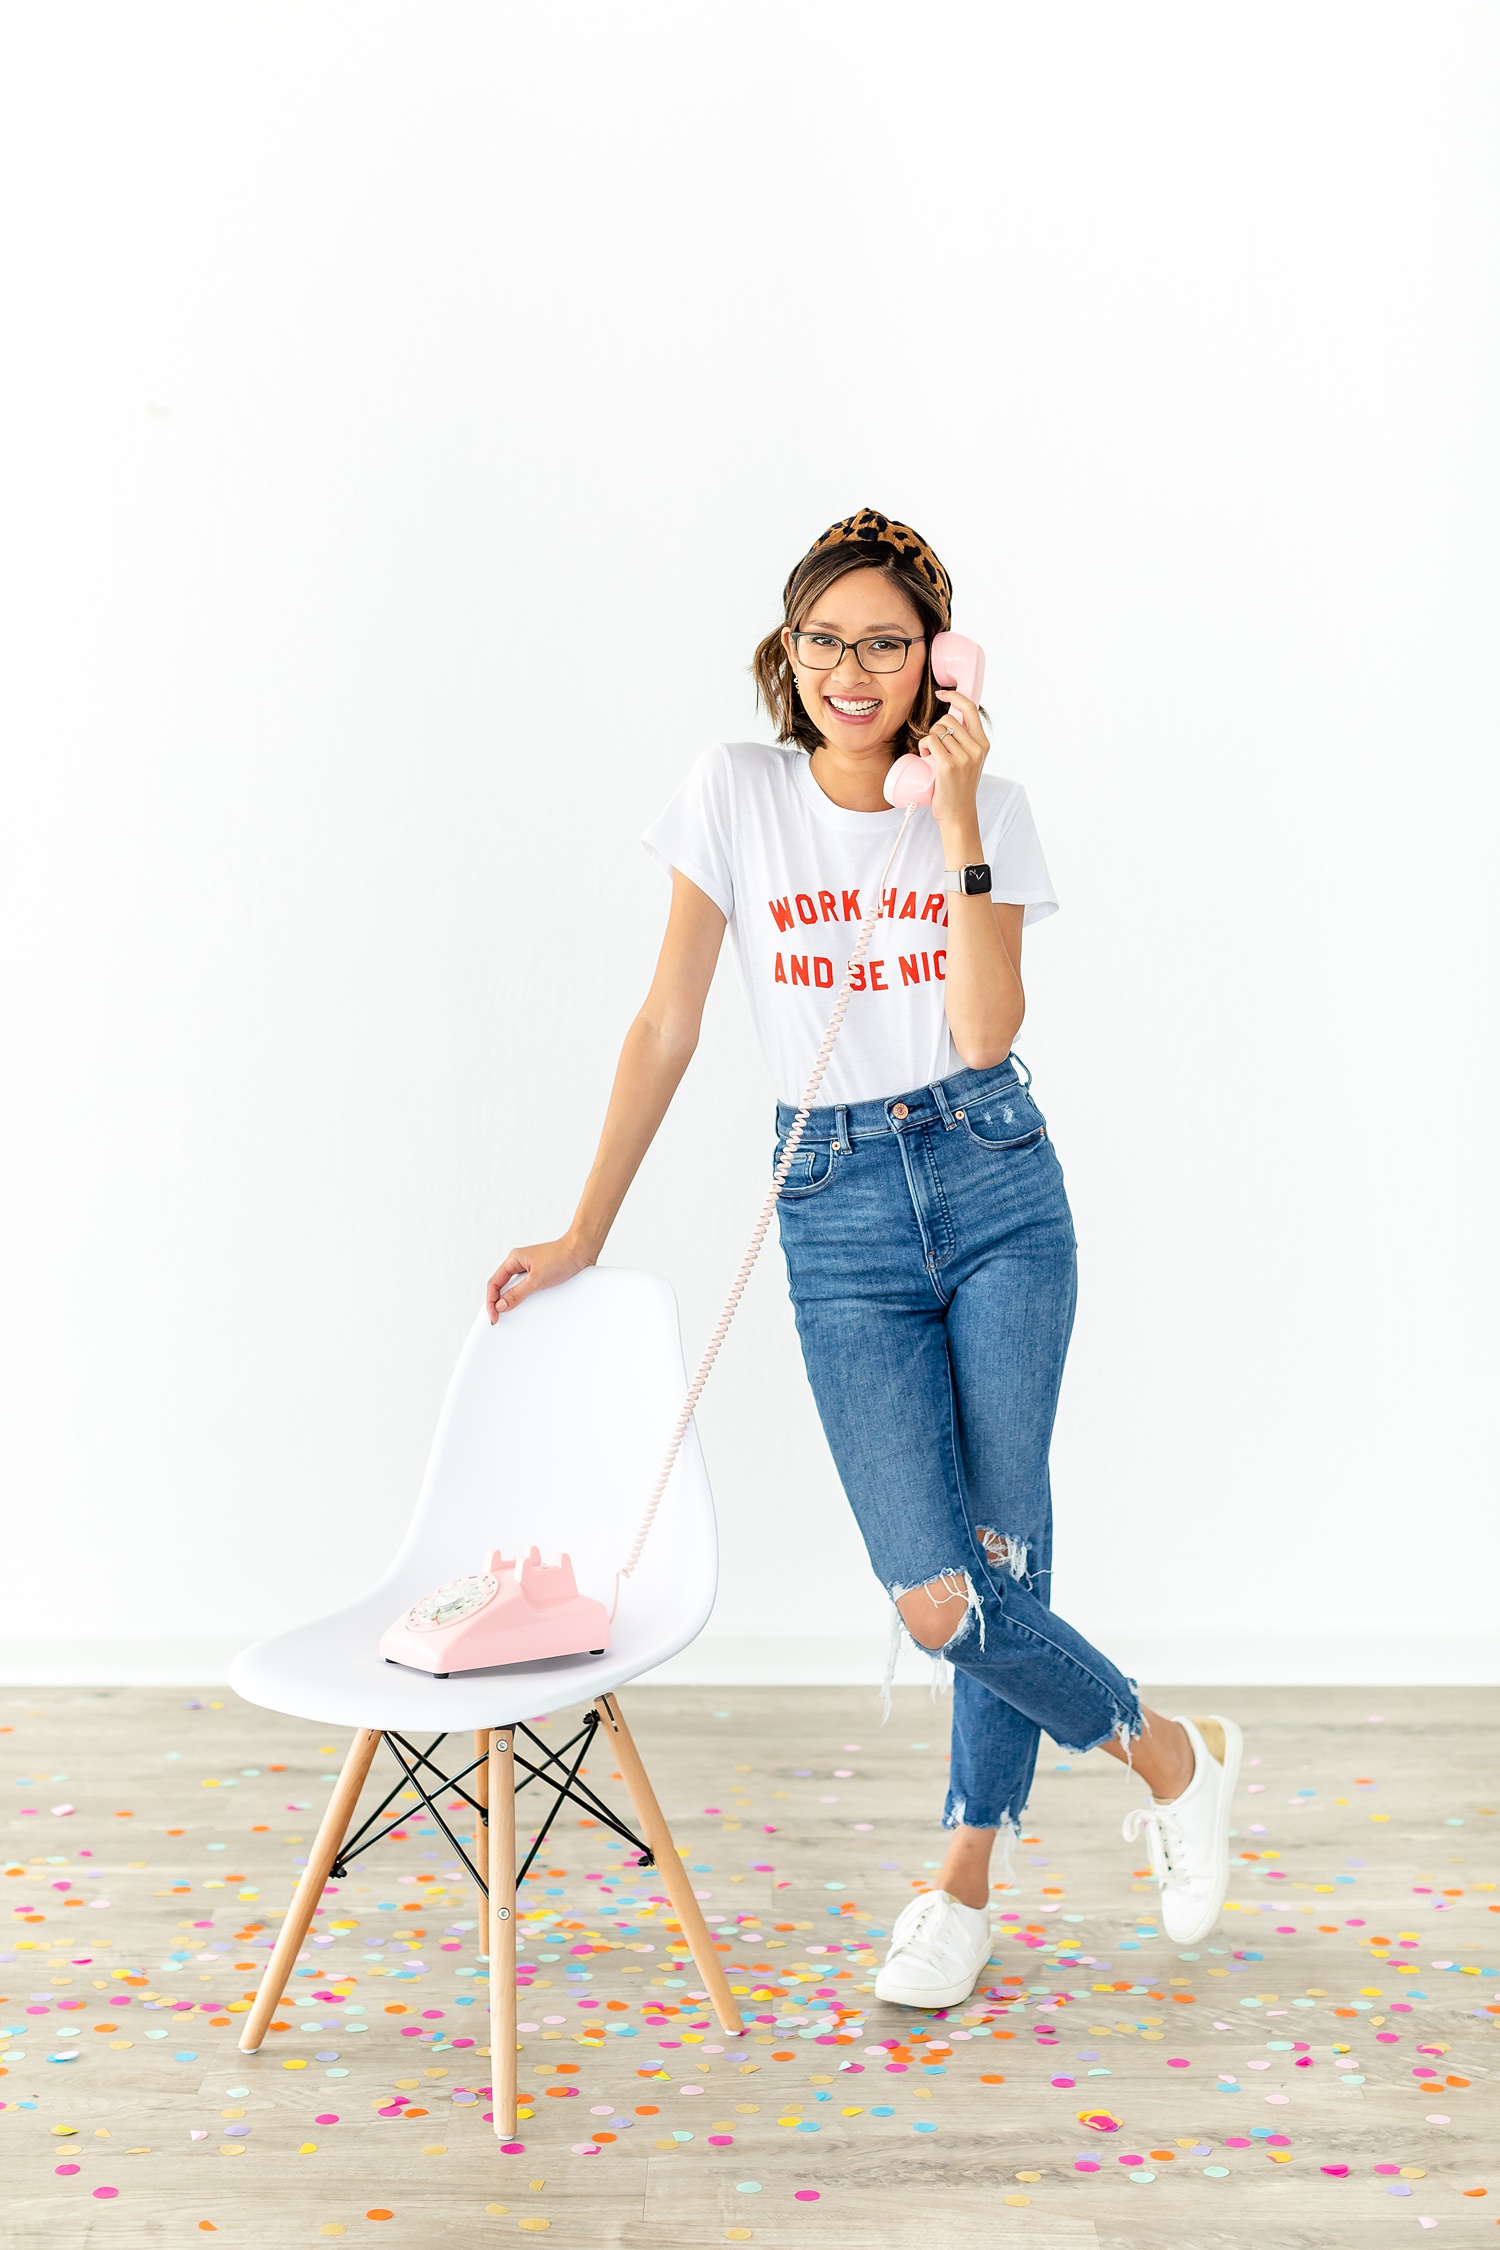 woman wearing a shirt that says "work hard be nice." She's leaning on a white chair and holding a pink retro cord phone.